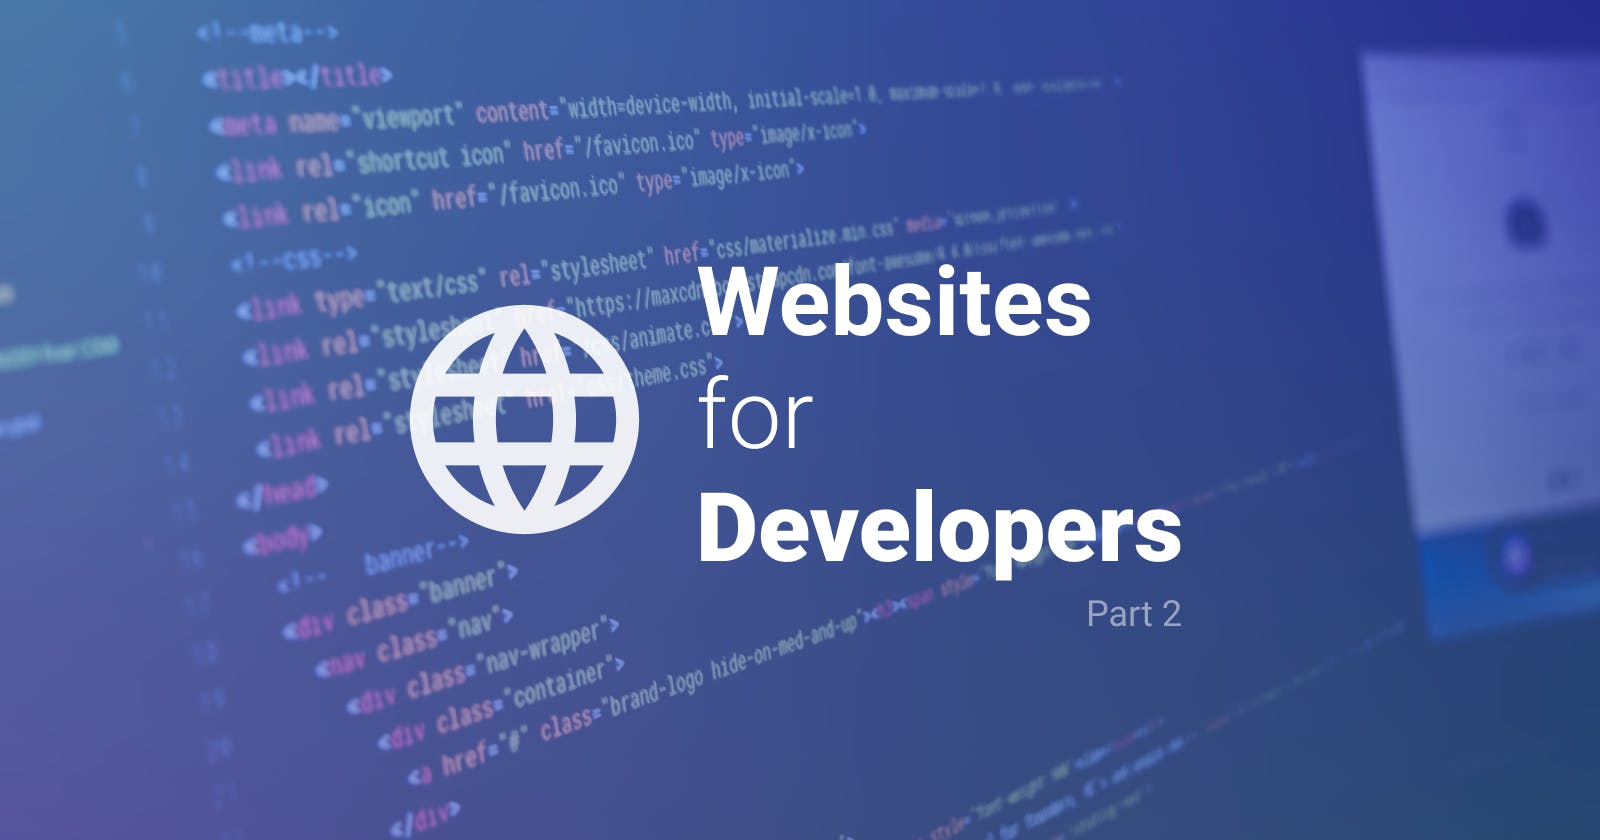 Some More Useful Website for Web Developers